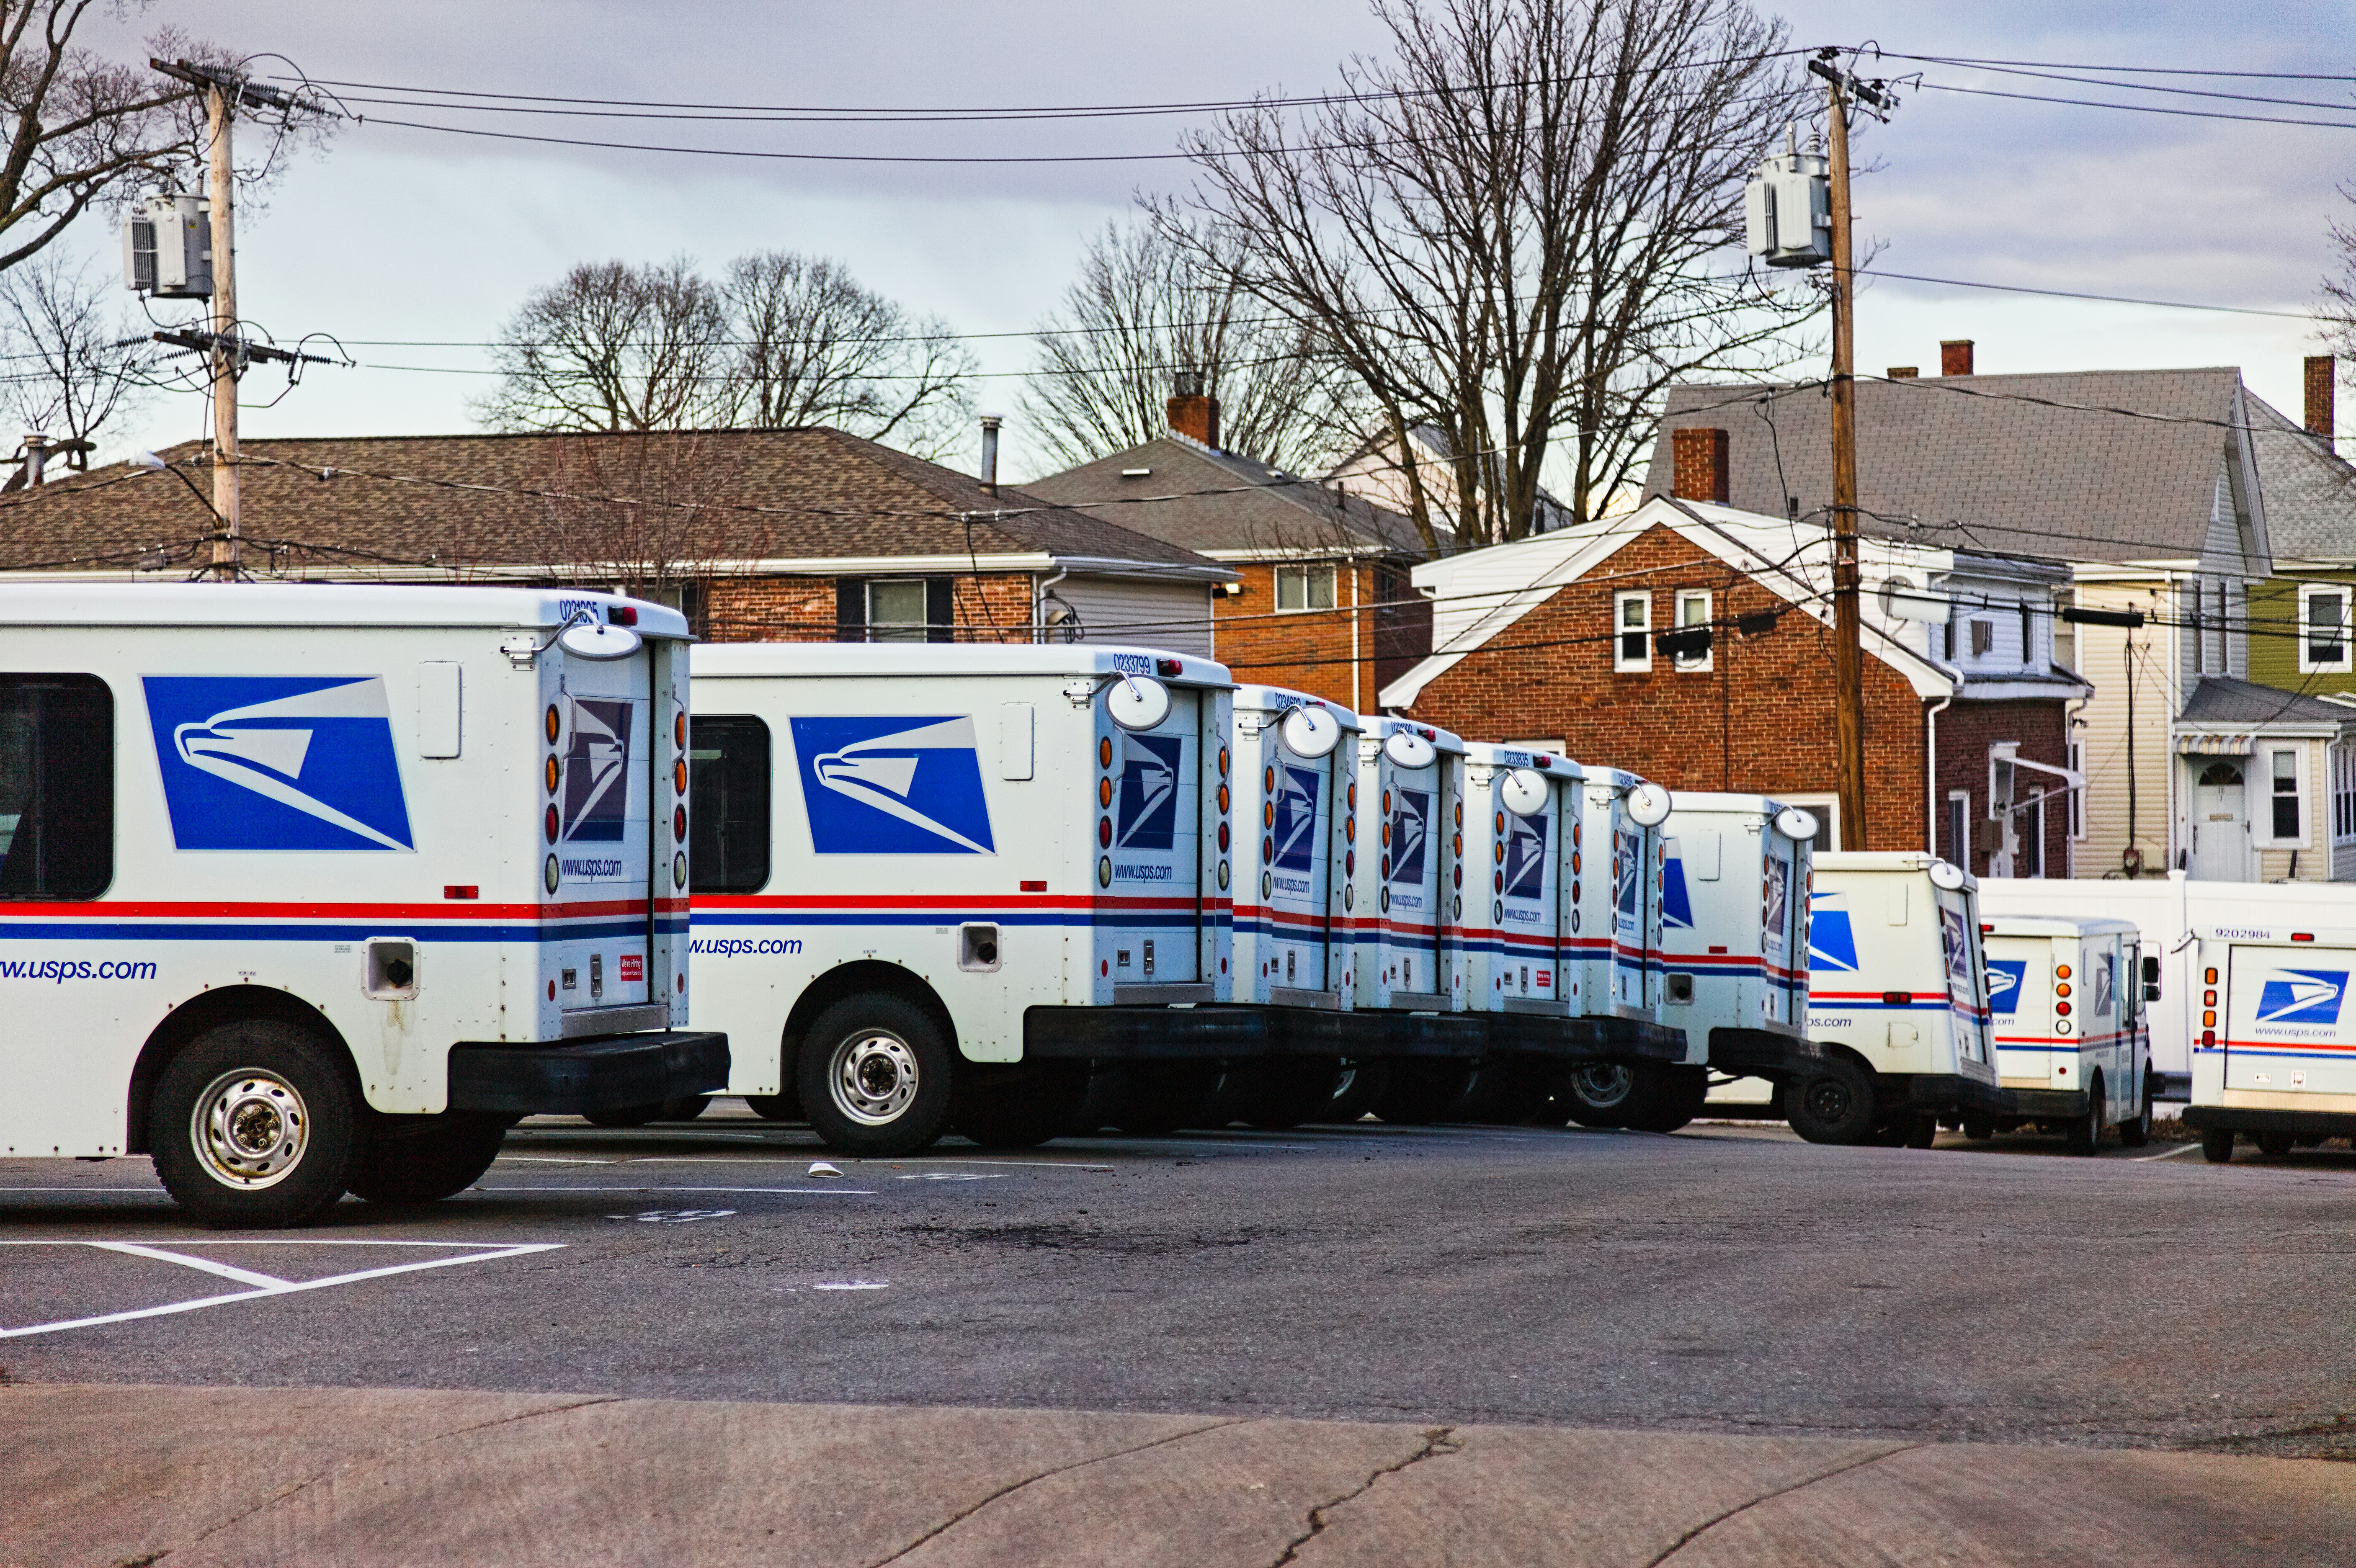 United States Postal Service mail vans lined up at the Waltham, Massachusetts mail handling facility this winter.

I previously incorrectly identified these vehicles as Grumman LLVs; this was pointed out to me several months after posting this image. There are two LLVs in this image; one at the end of the line of vehicles facing to the left, and one in the back with square taillights. The majority of these vehicles are Ford FFVs, a more modern delivery vehicle.